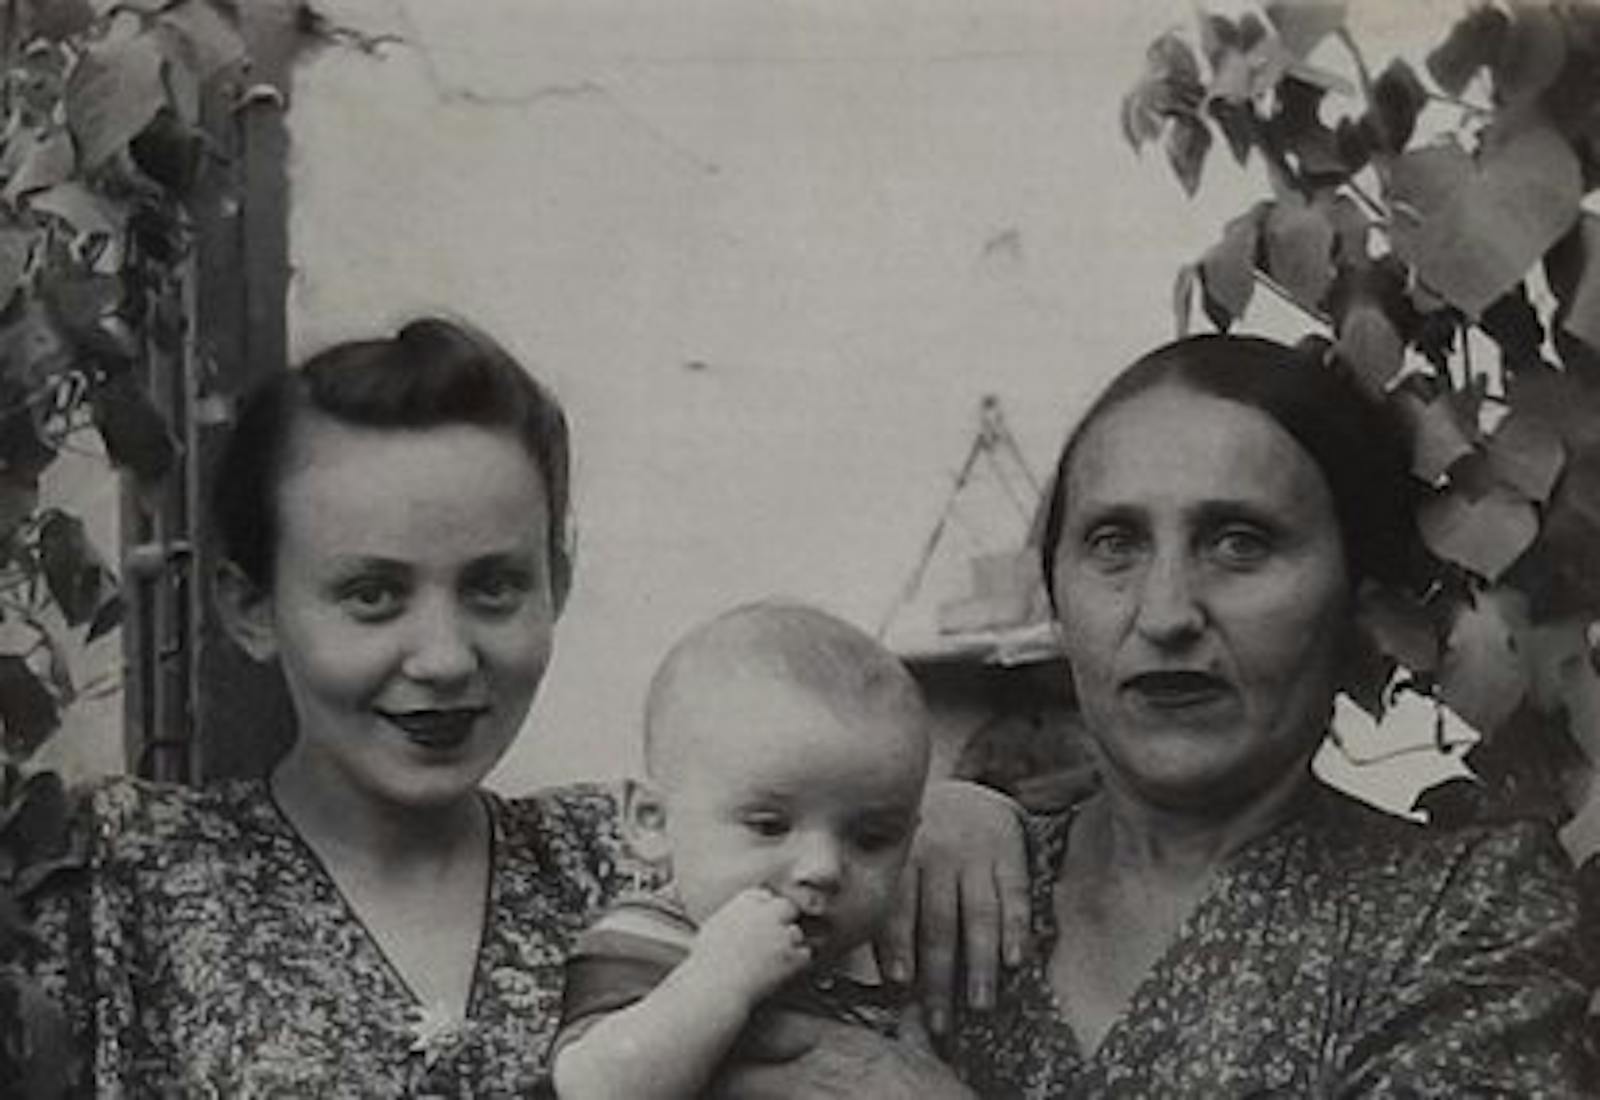 Shifra's great grandmother Leba with her daughter Yehudis and Yehudis's eldest son in 1950s Russia.